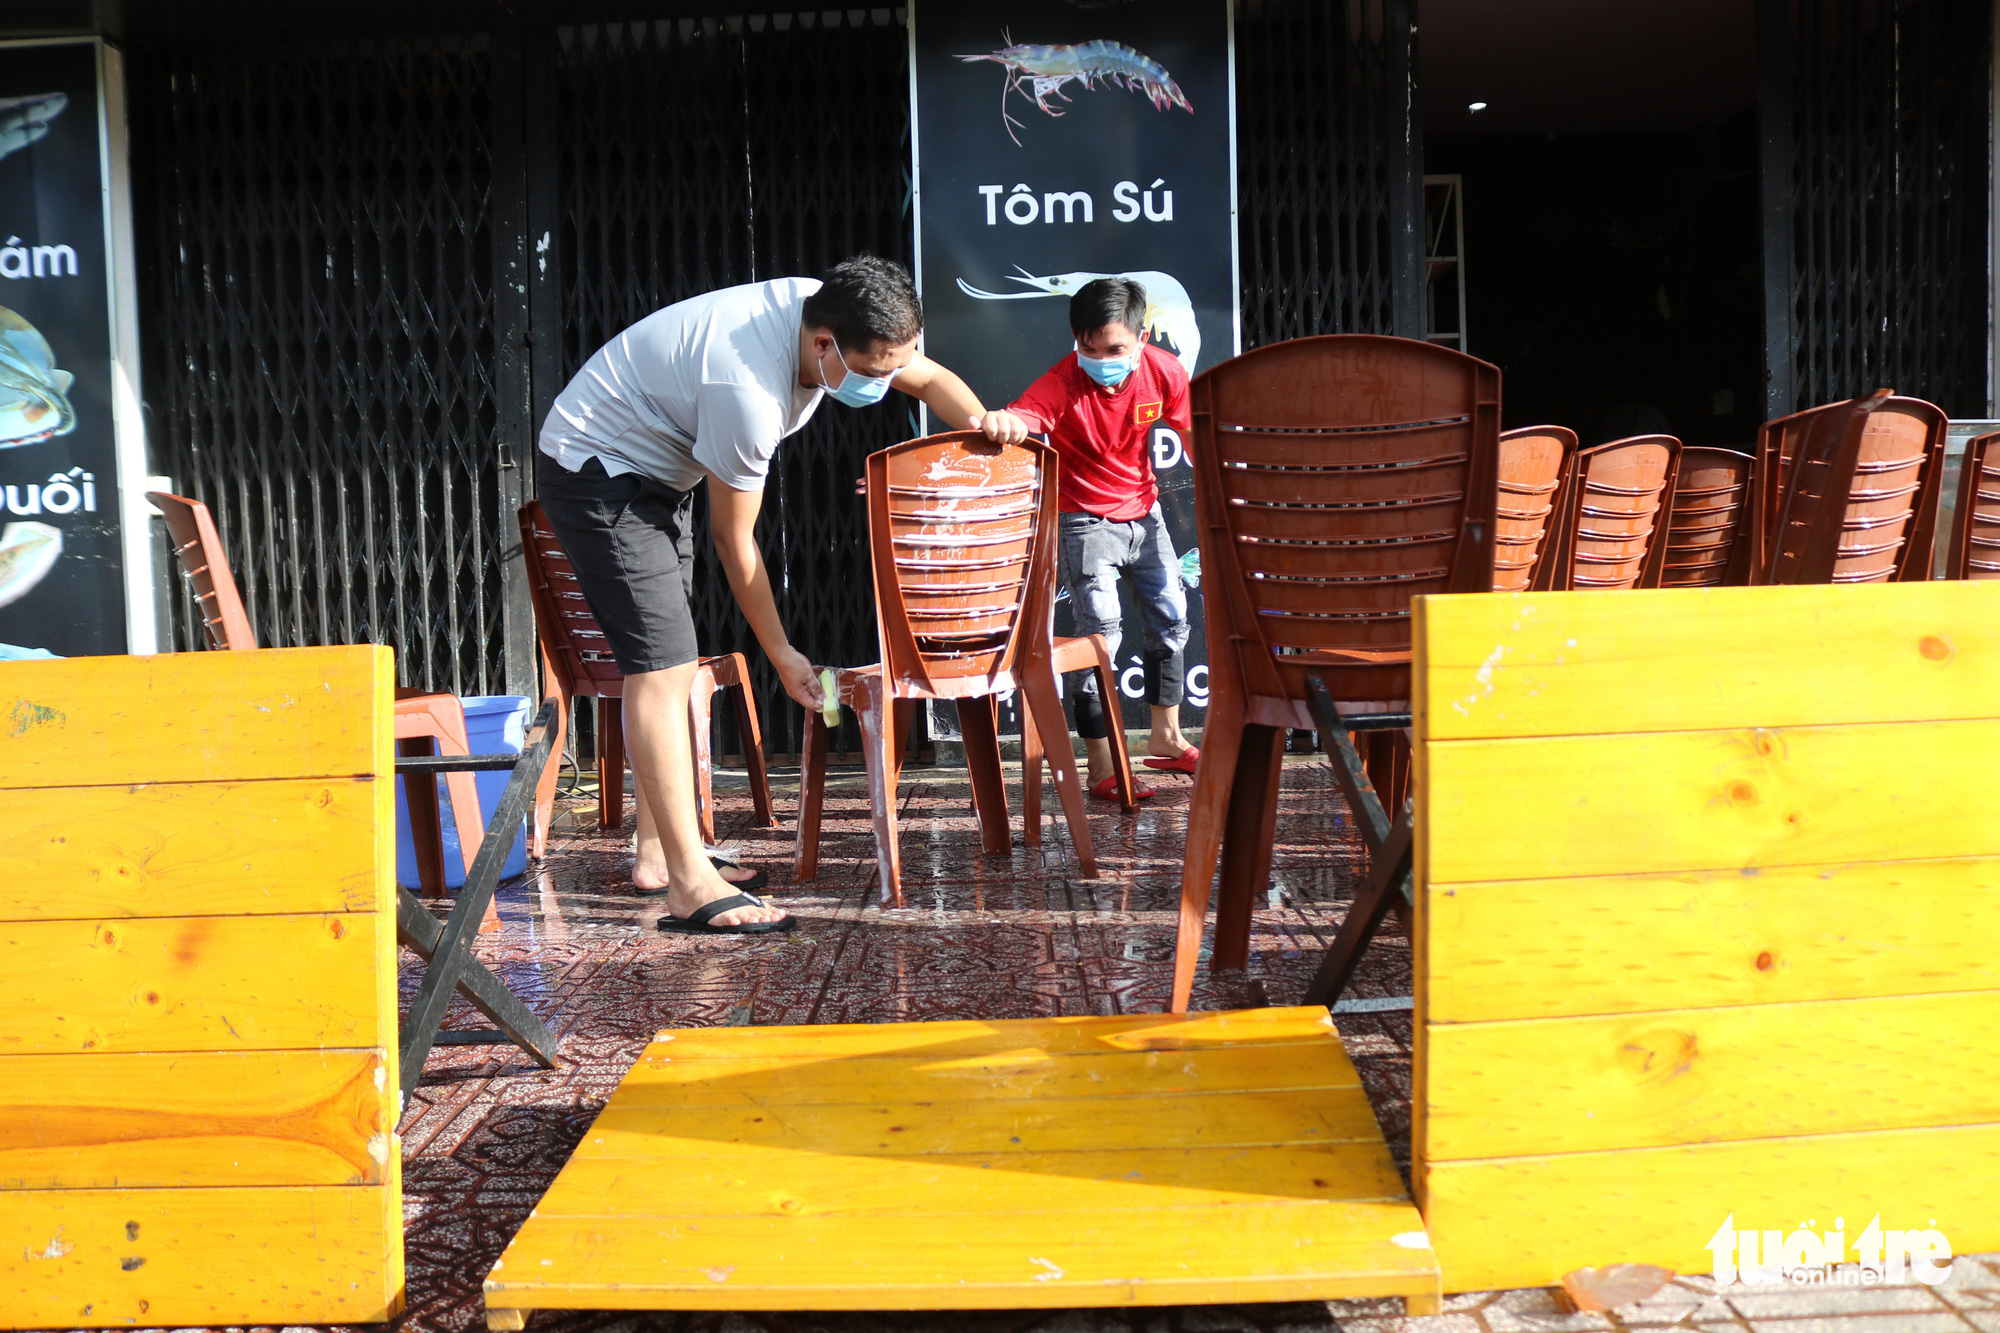 Staff members of a restaurant in Ho Chi Minh City, Vietnam sanitize the venue to prepare for reopening after the announcement of eased social distancing measures, April 22, 2020. Photo: Ngoc Phuong / Tuoi Tre